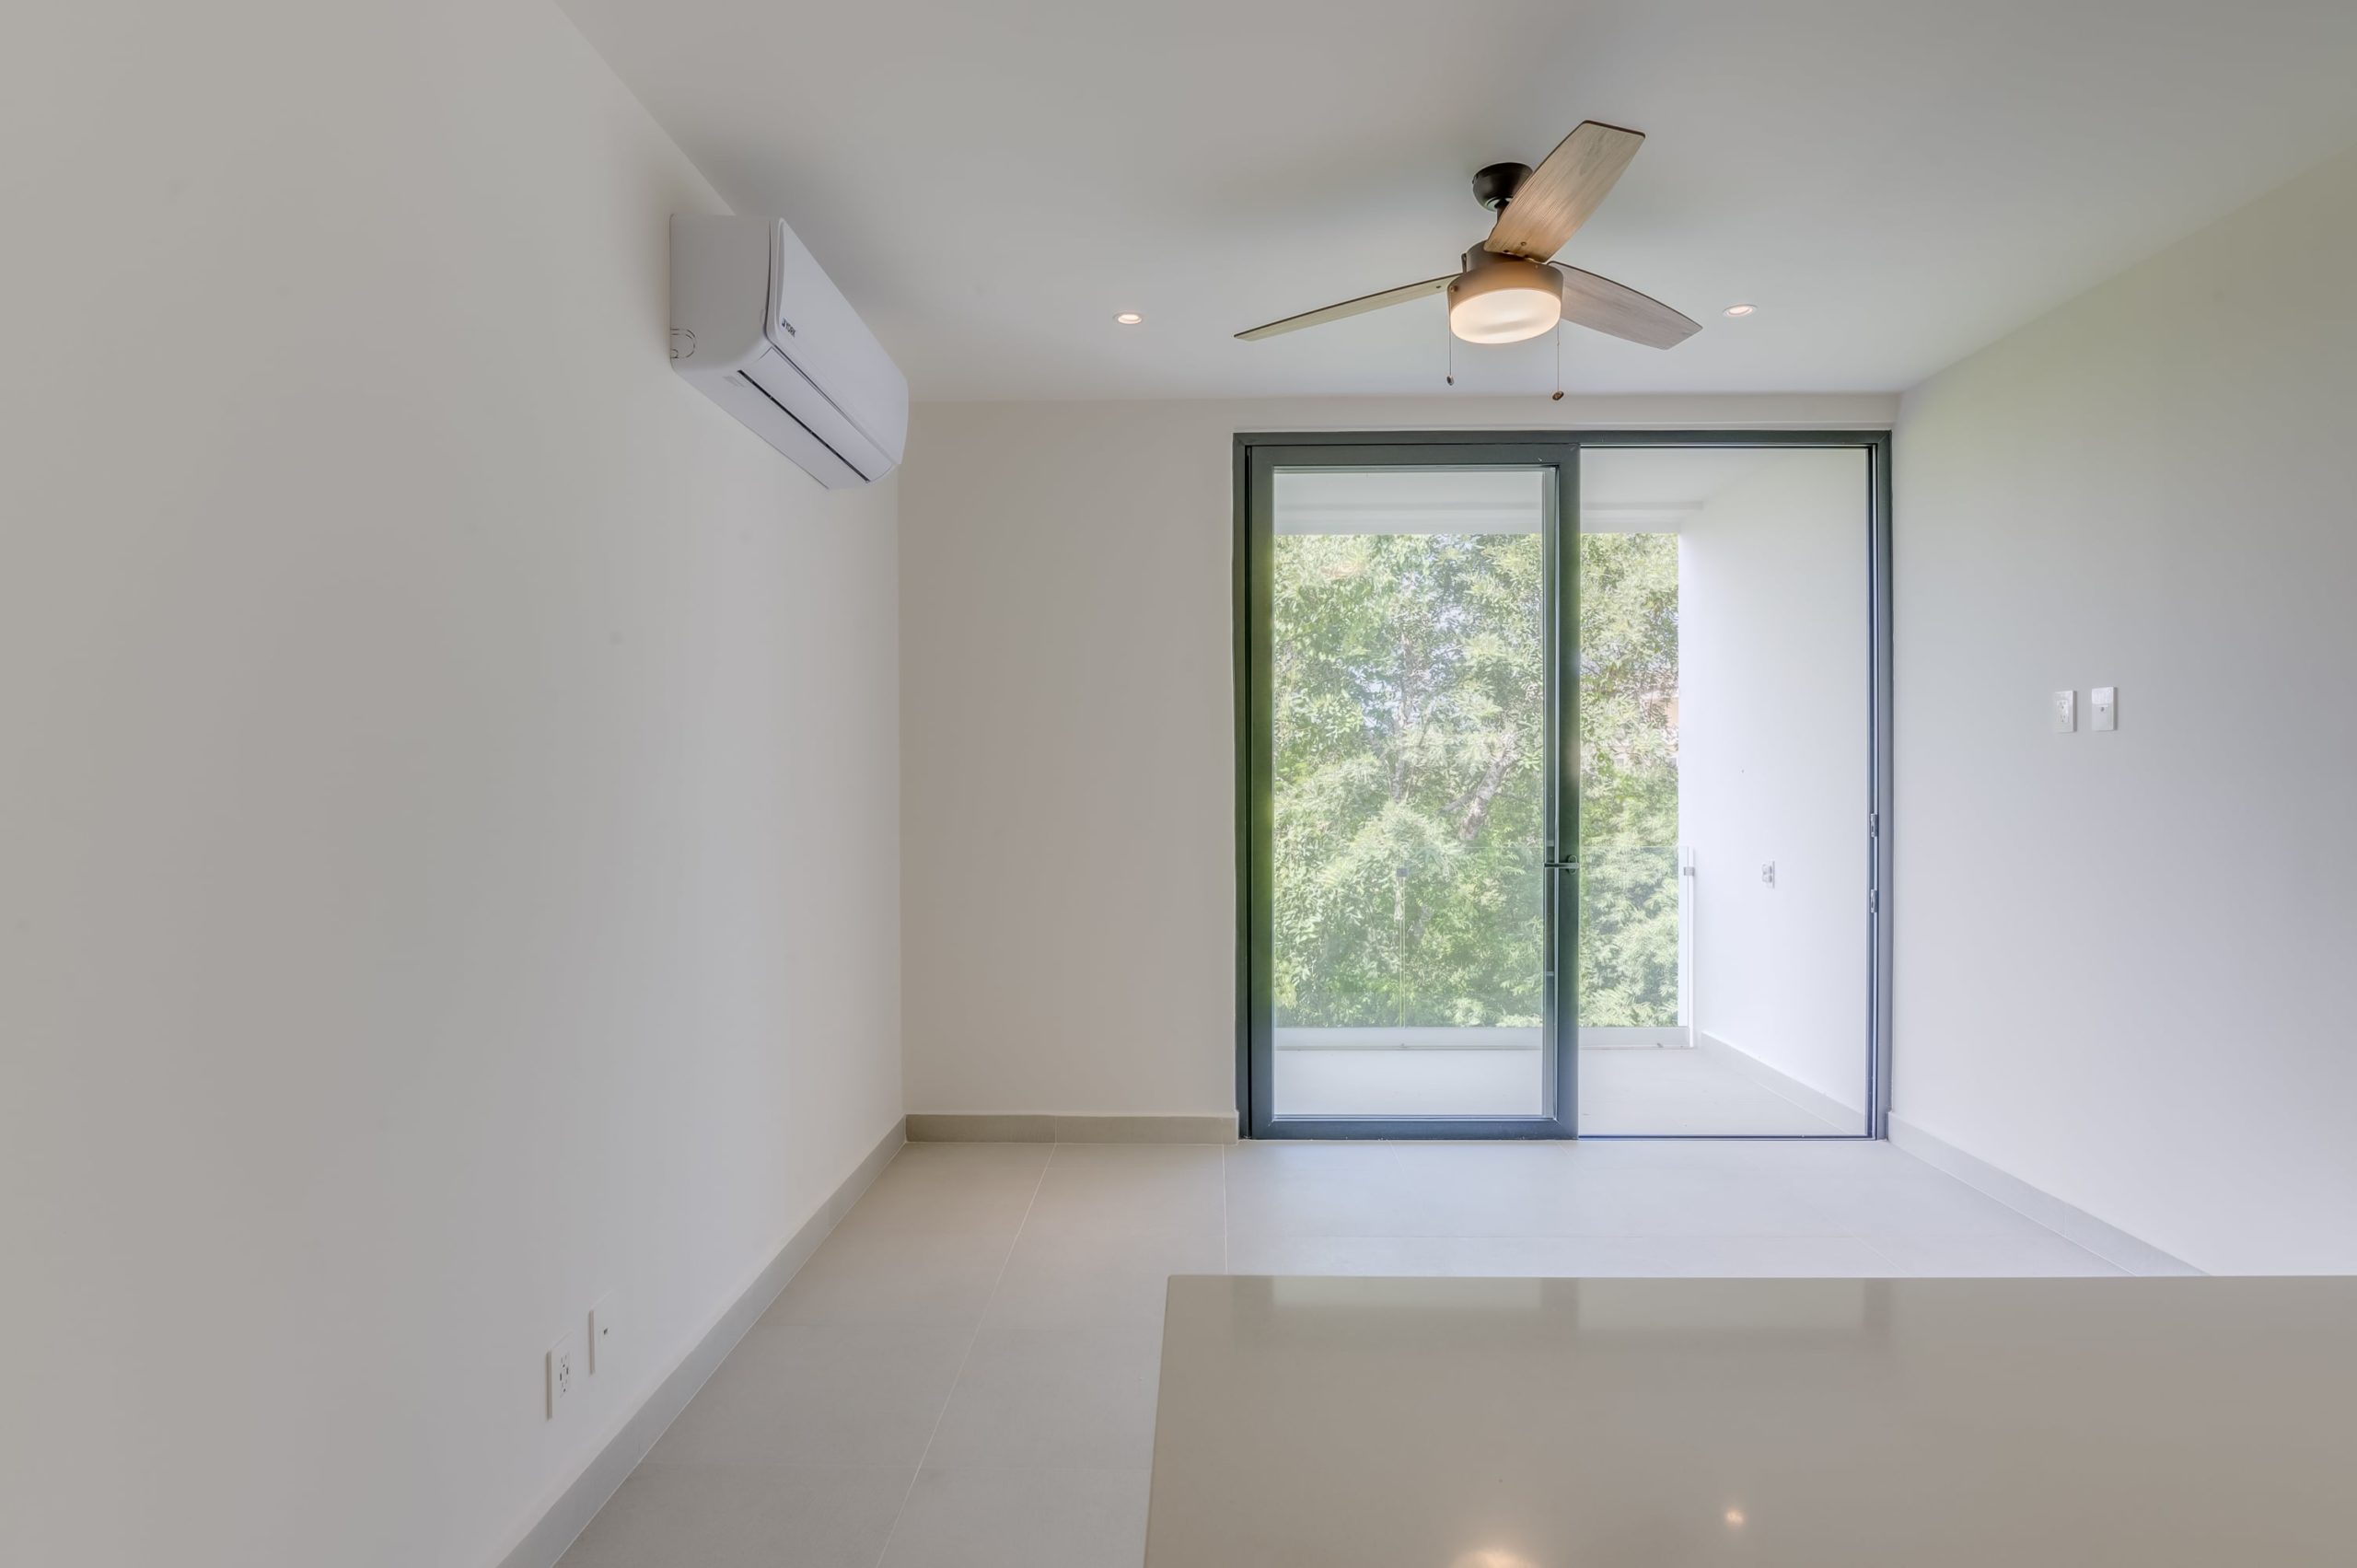 akumal condos for sale zamira penthouse living space